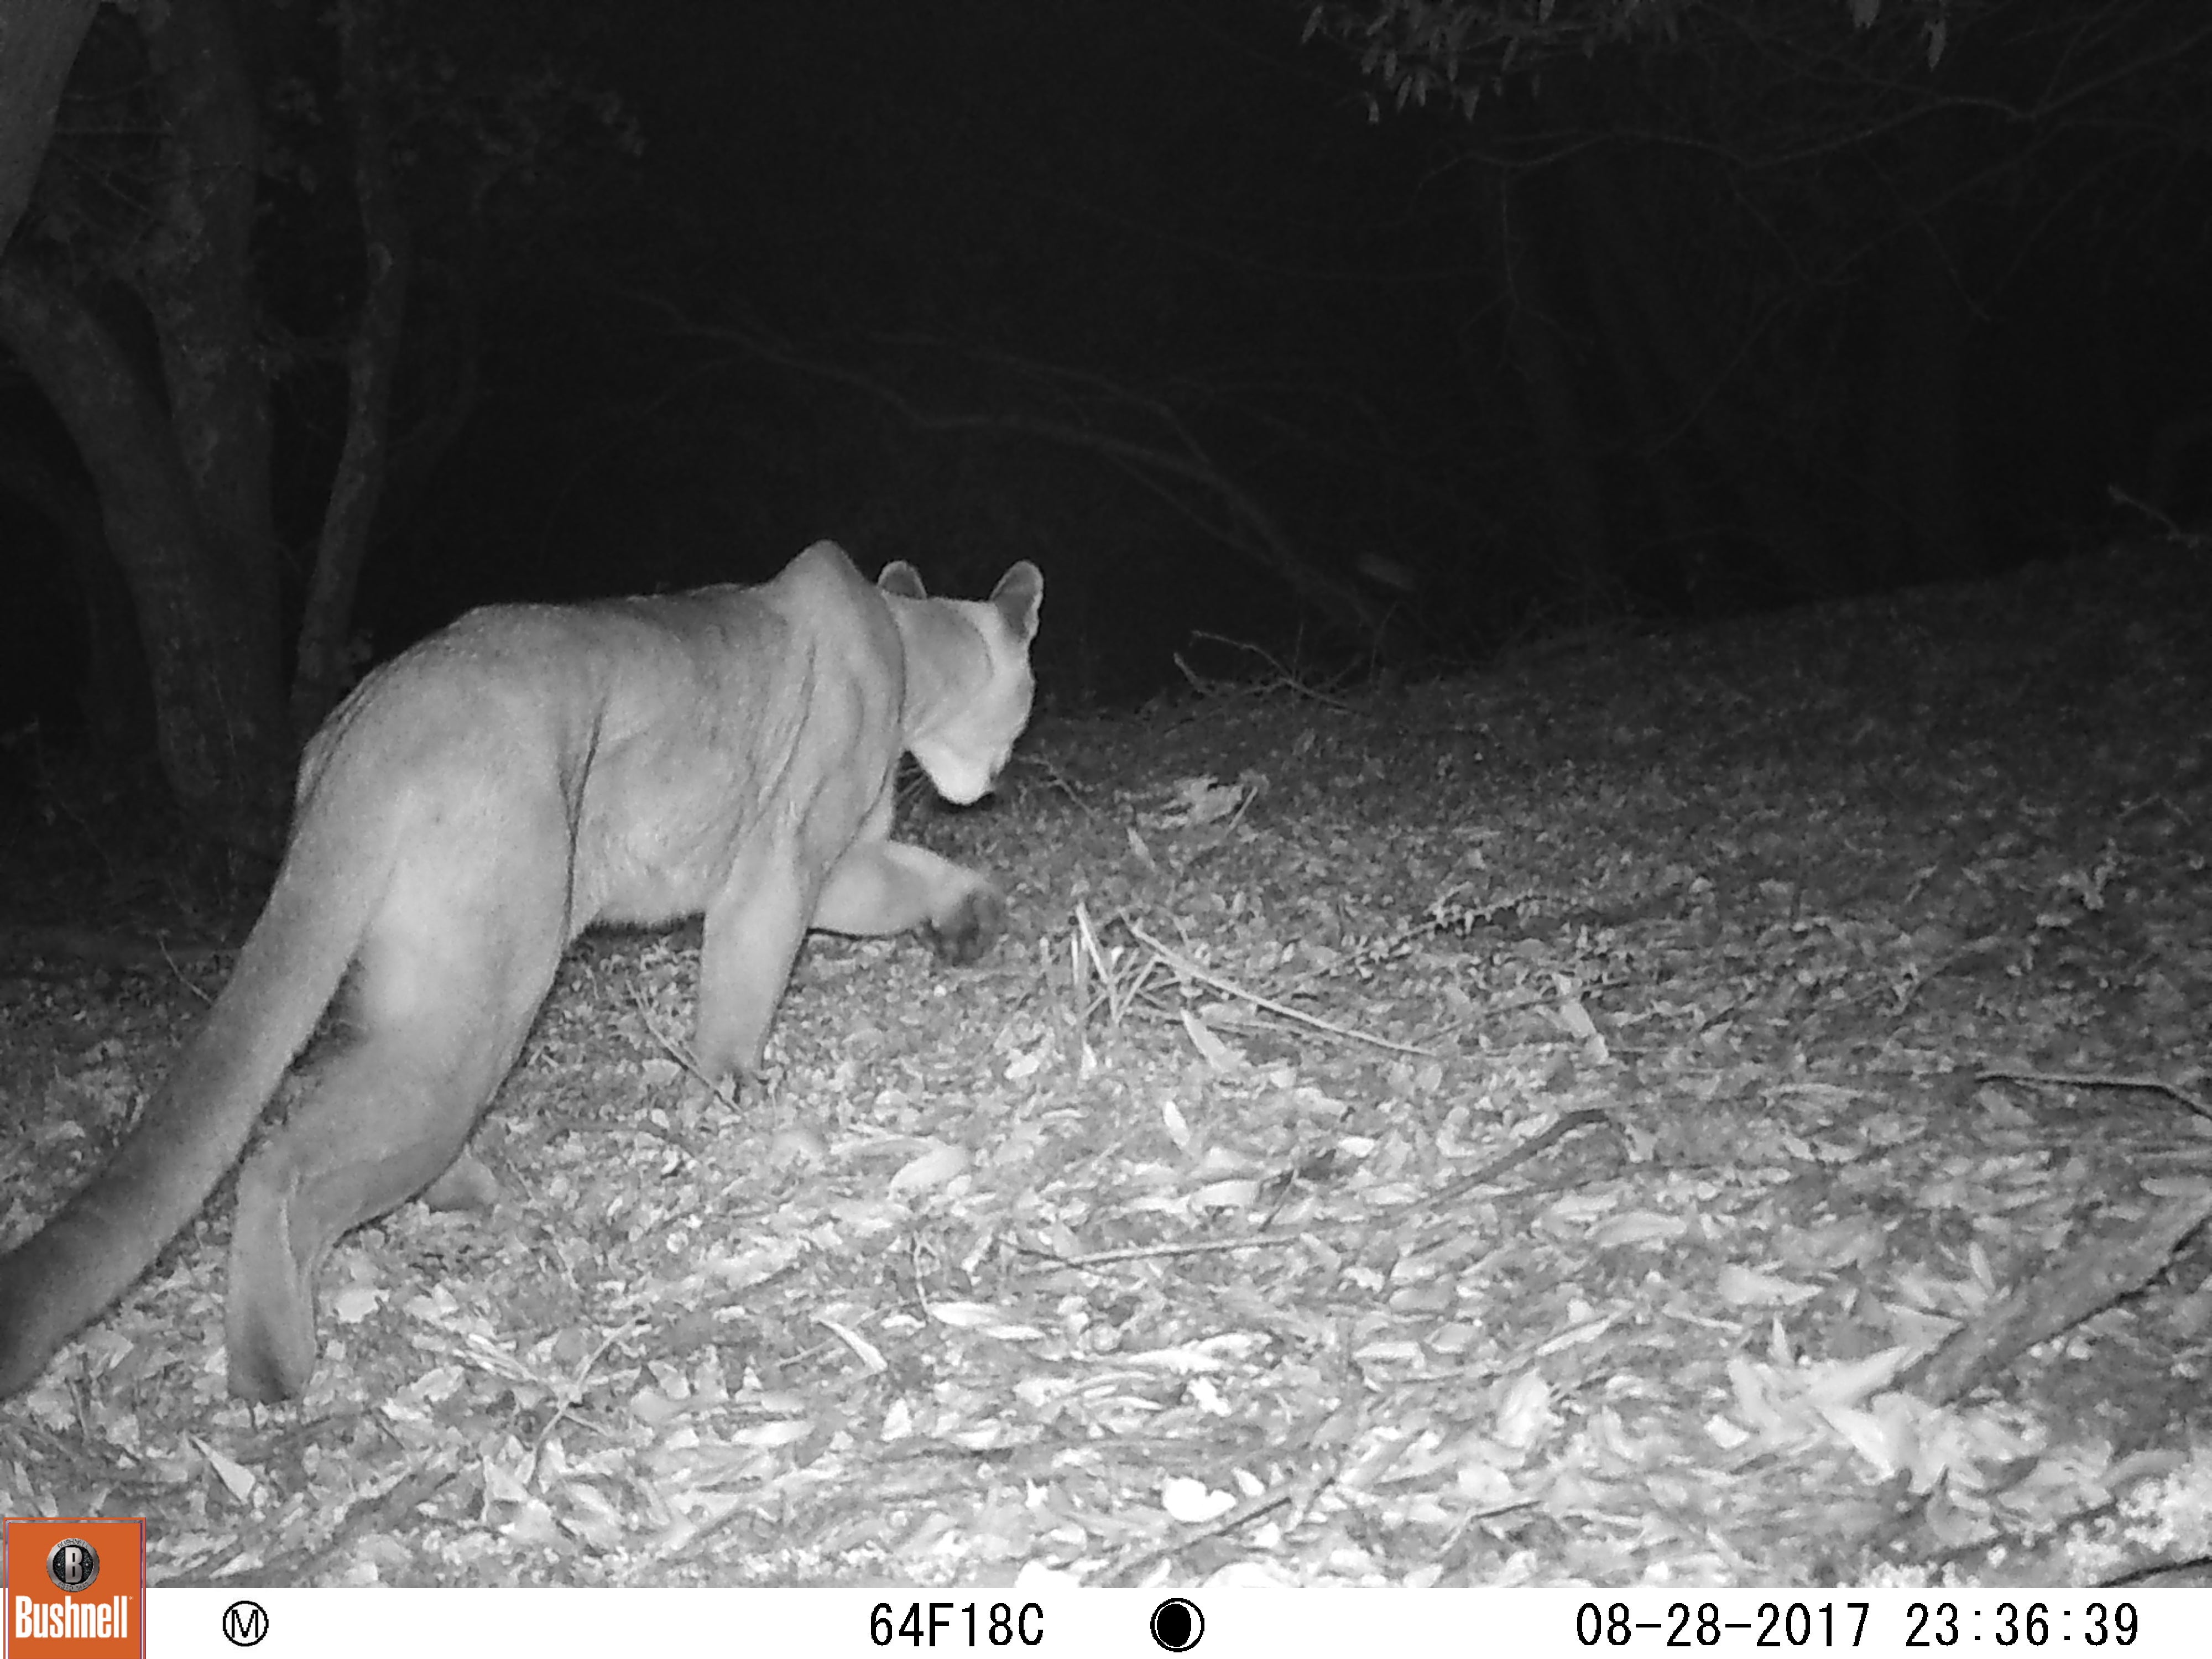 Mountain lion walks away from trail camera at night in black and white photo